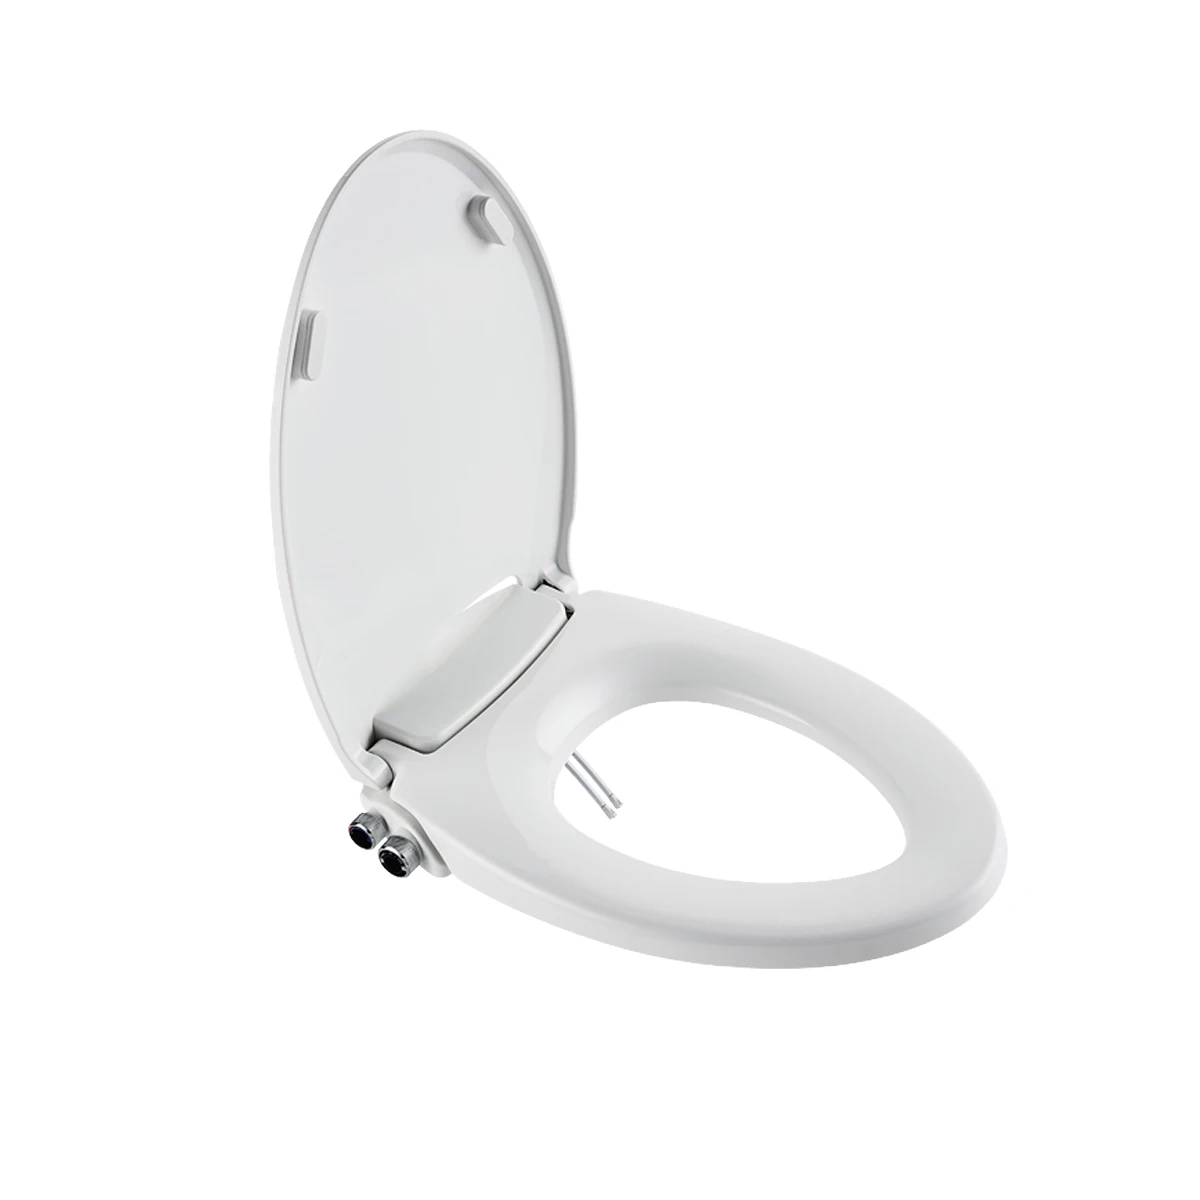 

Sanitary Ware Non Electric Elongated Toilet Seat With Bidet Buy Hot and Cold Nozzle Self-Cleaning Bidet Toilet Seat